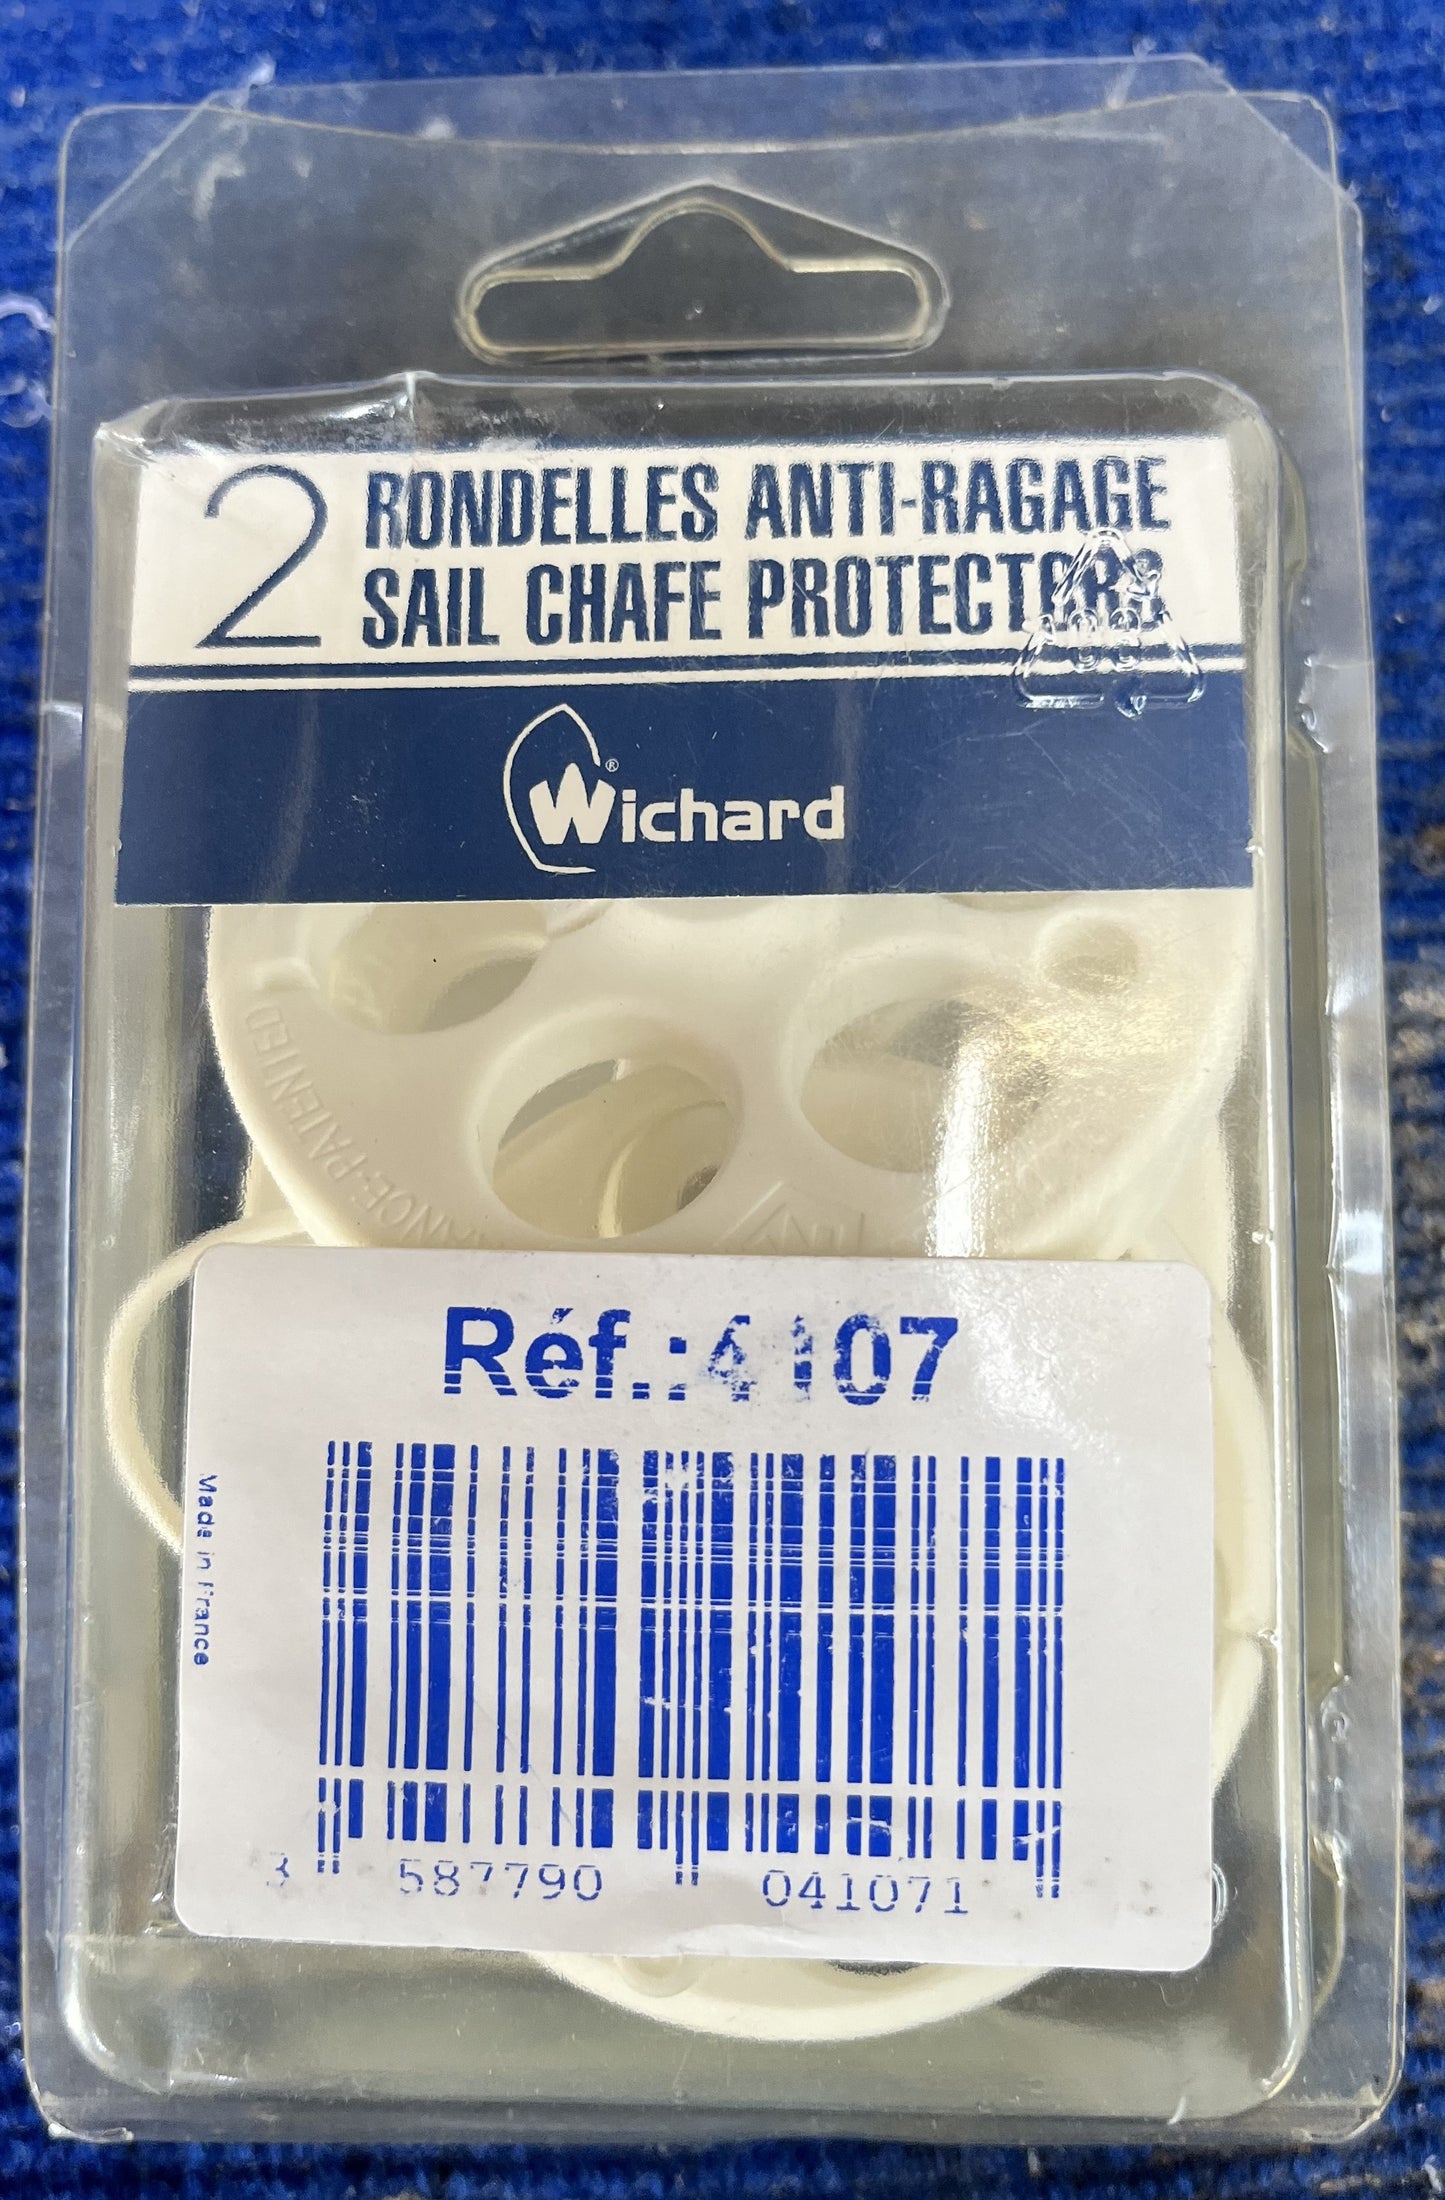 Witchard sail chafe protector (4pack)